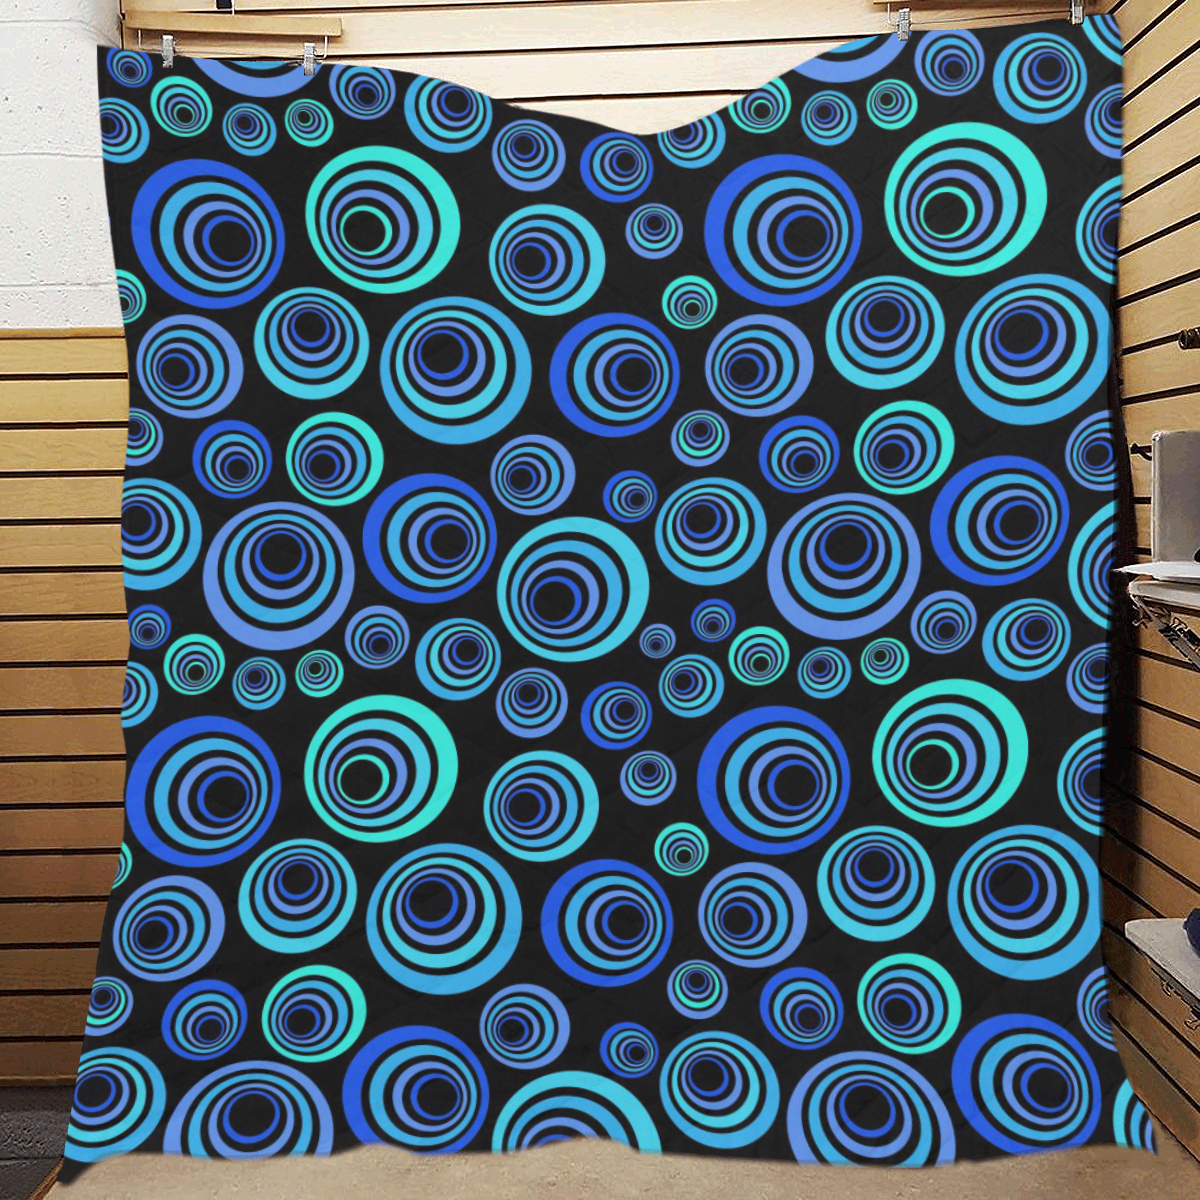 Retro Psychedelic Pretty Blue Pattern Quilt 70"x80"